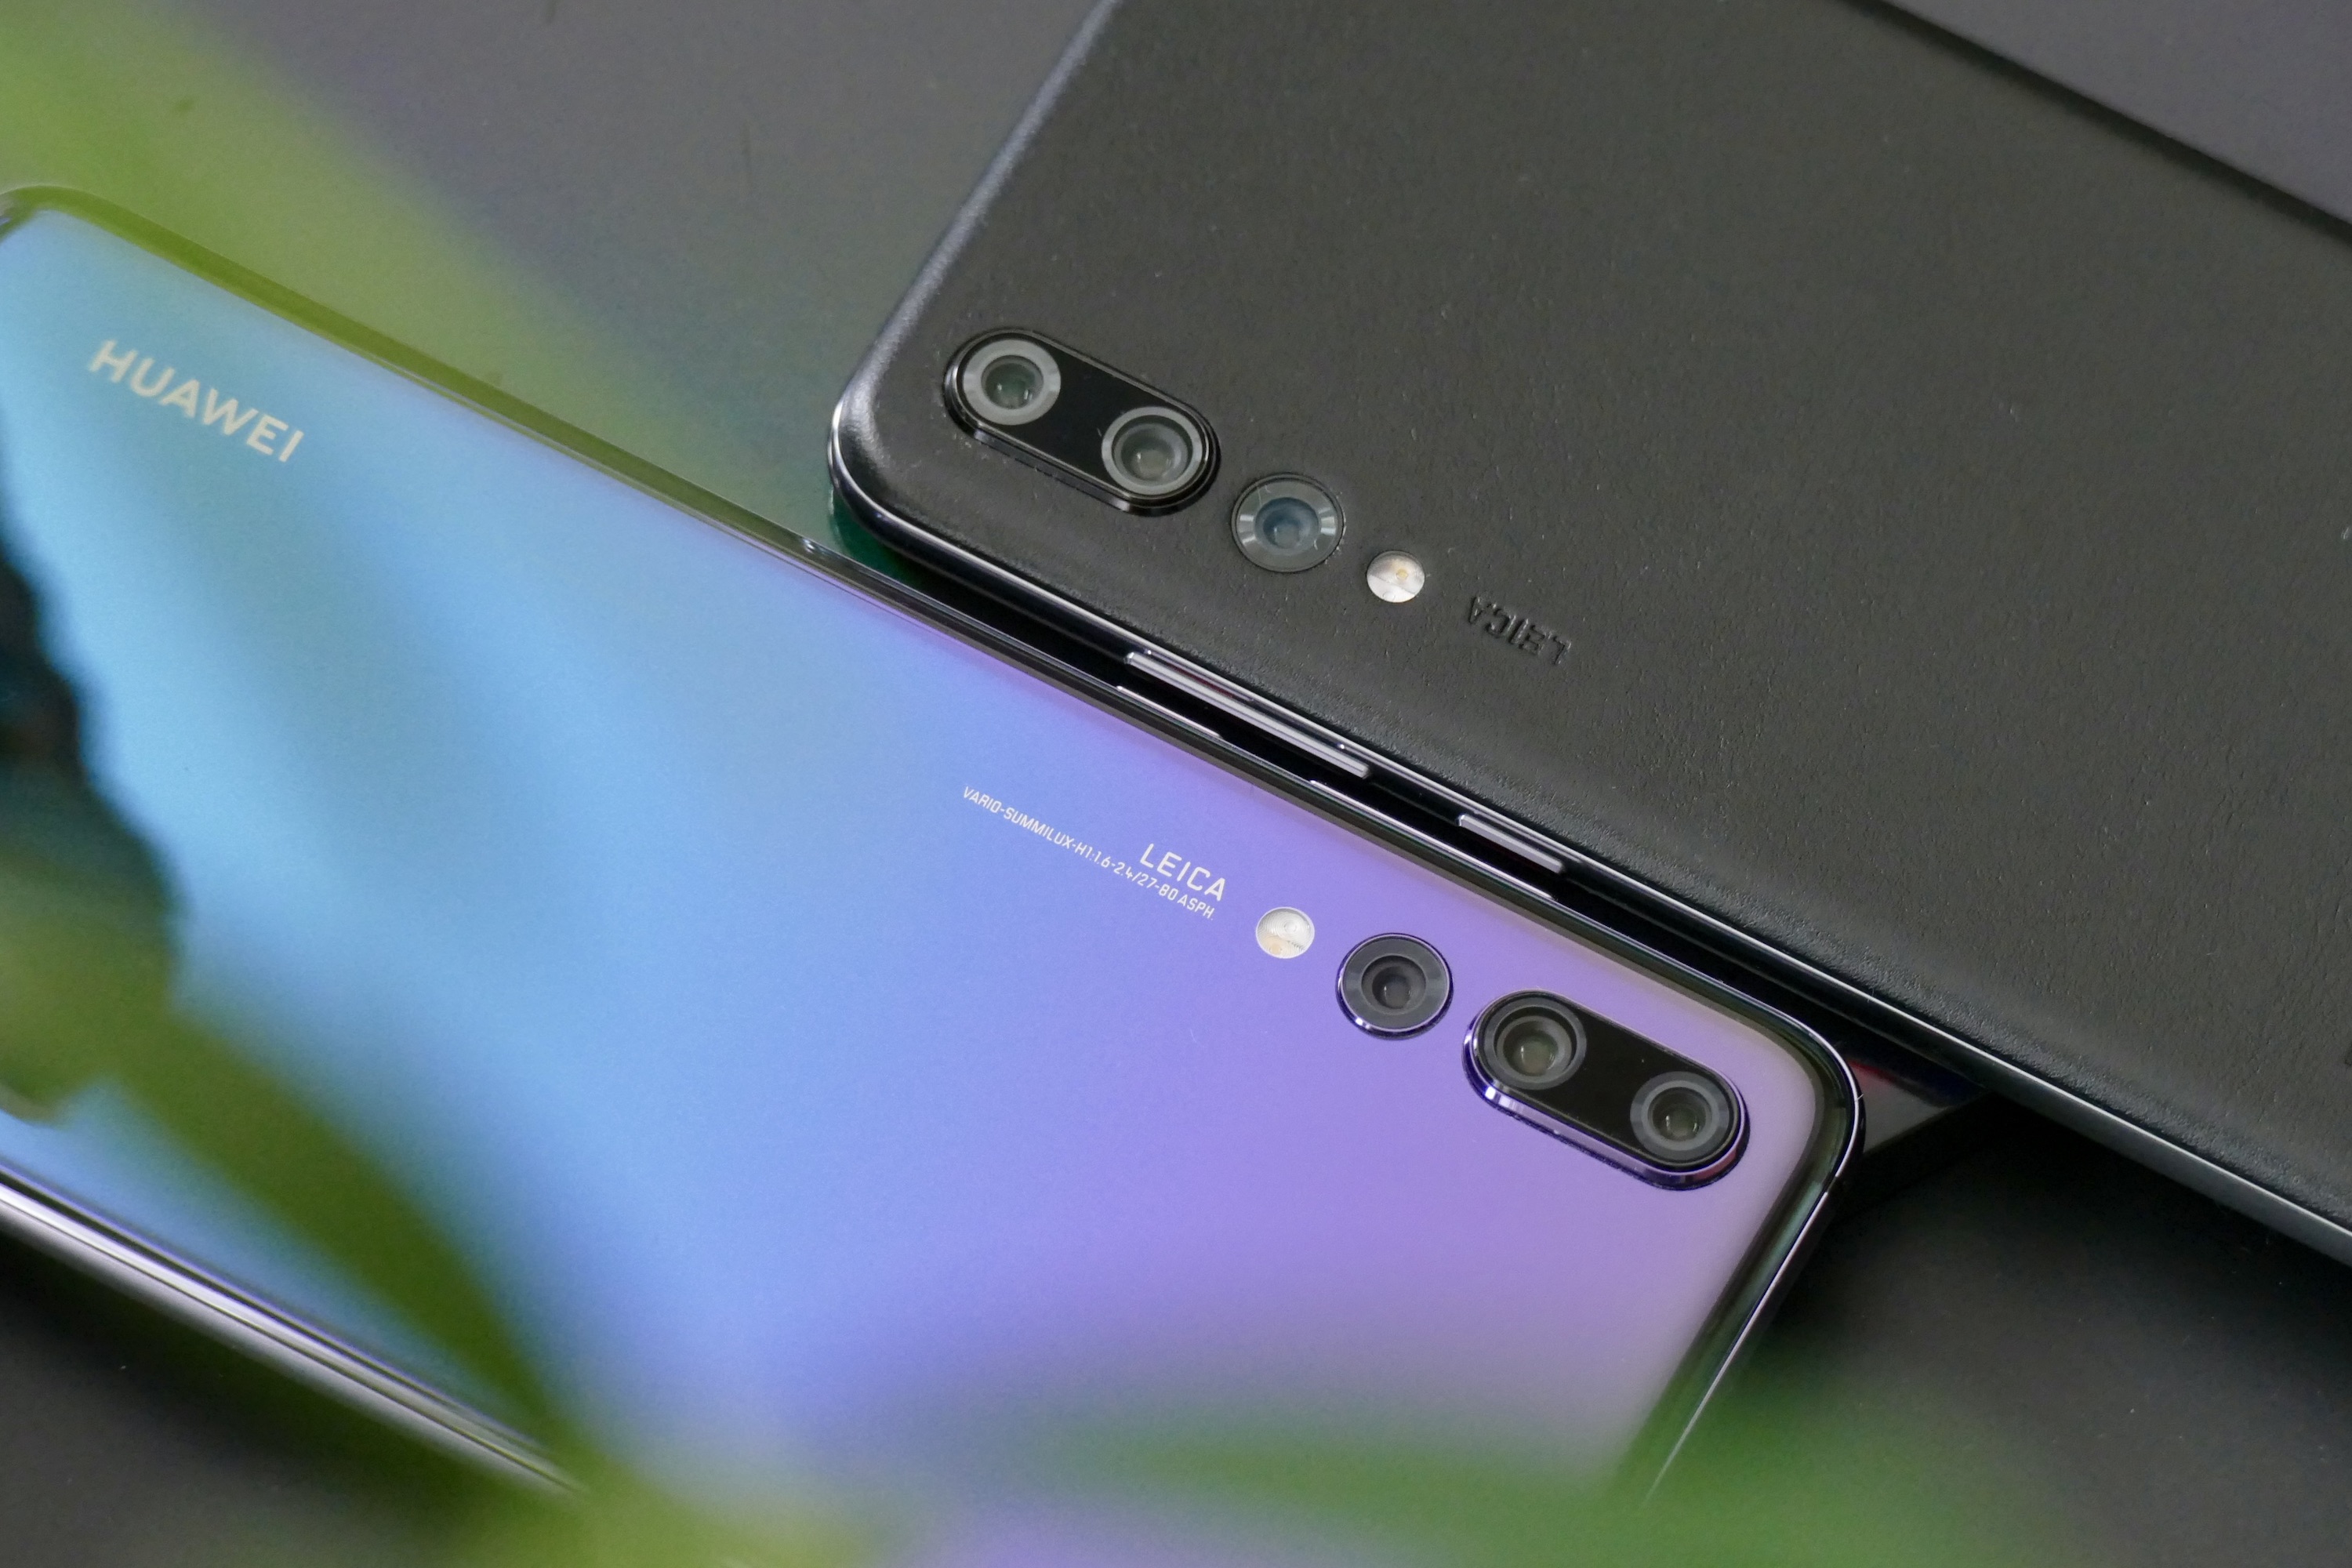 Huawei P20 Pro and P20 Pro in leather, showing the Leica cameras.